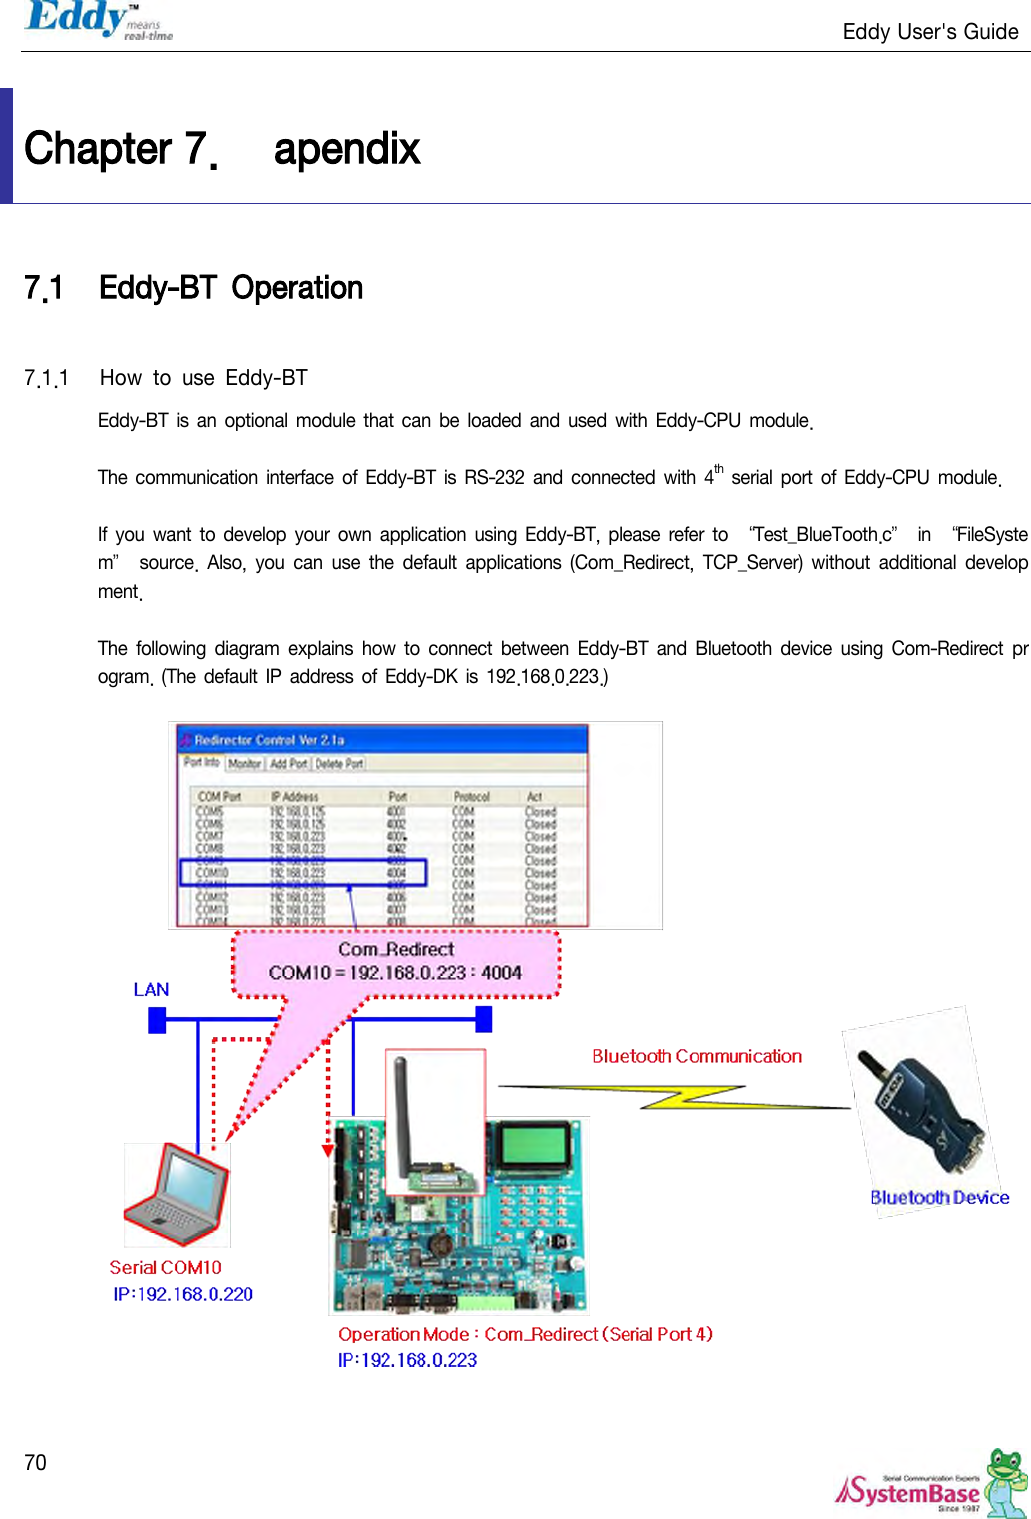                                                                   Eddy User&apos;s Guide   70  Chapter 7. apendix 7.1 Eddy-BT  Operation  7.1.1 How  to  use  Eddy-BT Eddy-BT is an optional module  that can be loaded and  used  with  Eddy-CPU  module.  The communication interface of  Eddy-BT is RS-232 and connected with  4th serial port of Eddy-CPU  module.  If you want to  develop  your own application  using Eddy-BT, please  refer  to  ‚Test_BlueTooth.c‛ in  ‚FileSystem‛  source. Also,  you  can  use the  default  applications  (Com_Redirect,  TCP_Server)  without  additional  development.  The following  diagram explains  how to  connect  between  Eddy-BT  and  Bluetooth device using  Com-Redirect program. (The default IP address of  Eddy-DK  is 192.168.0.223.)     